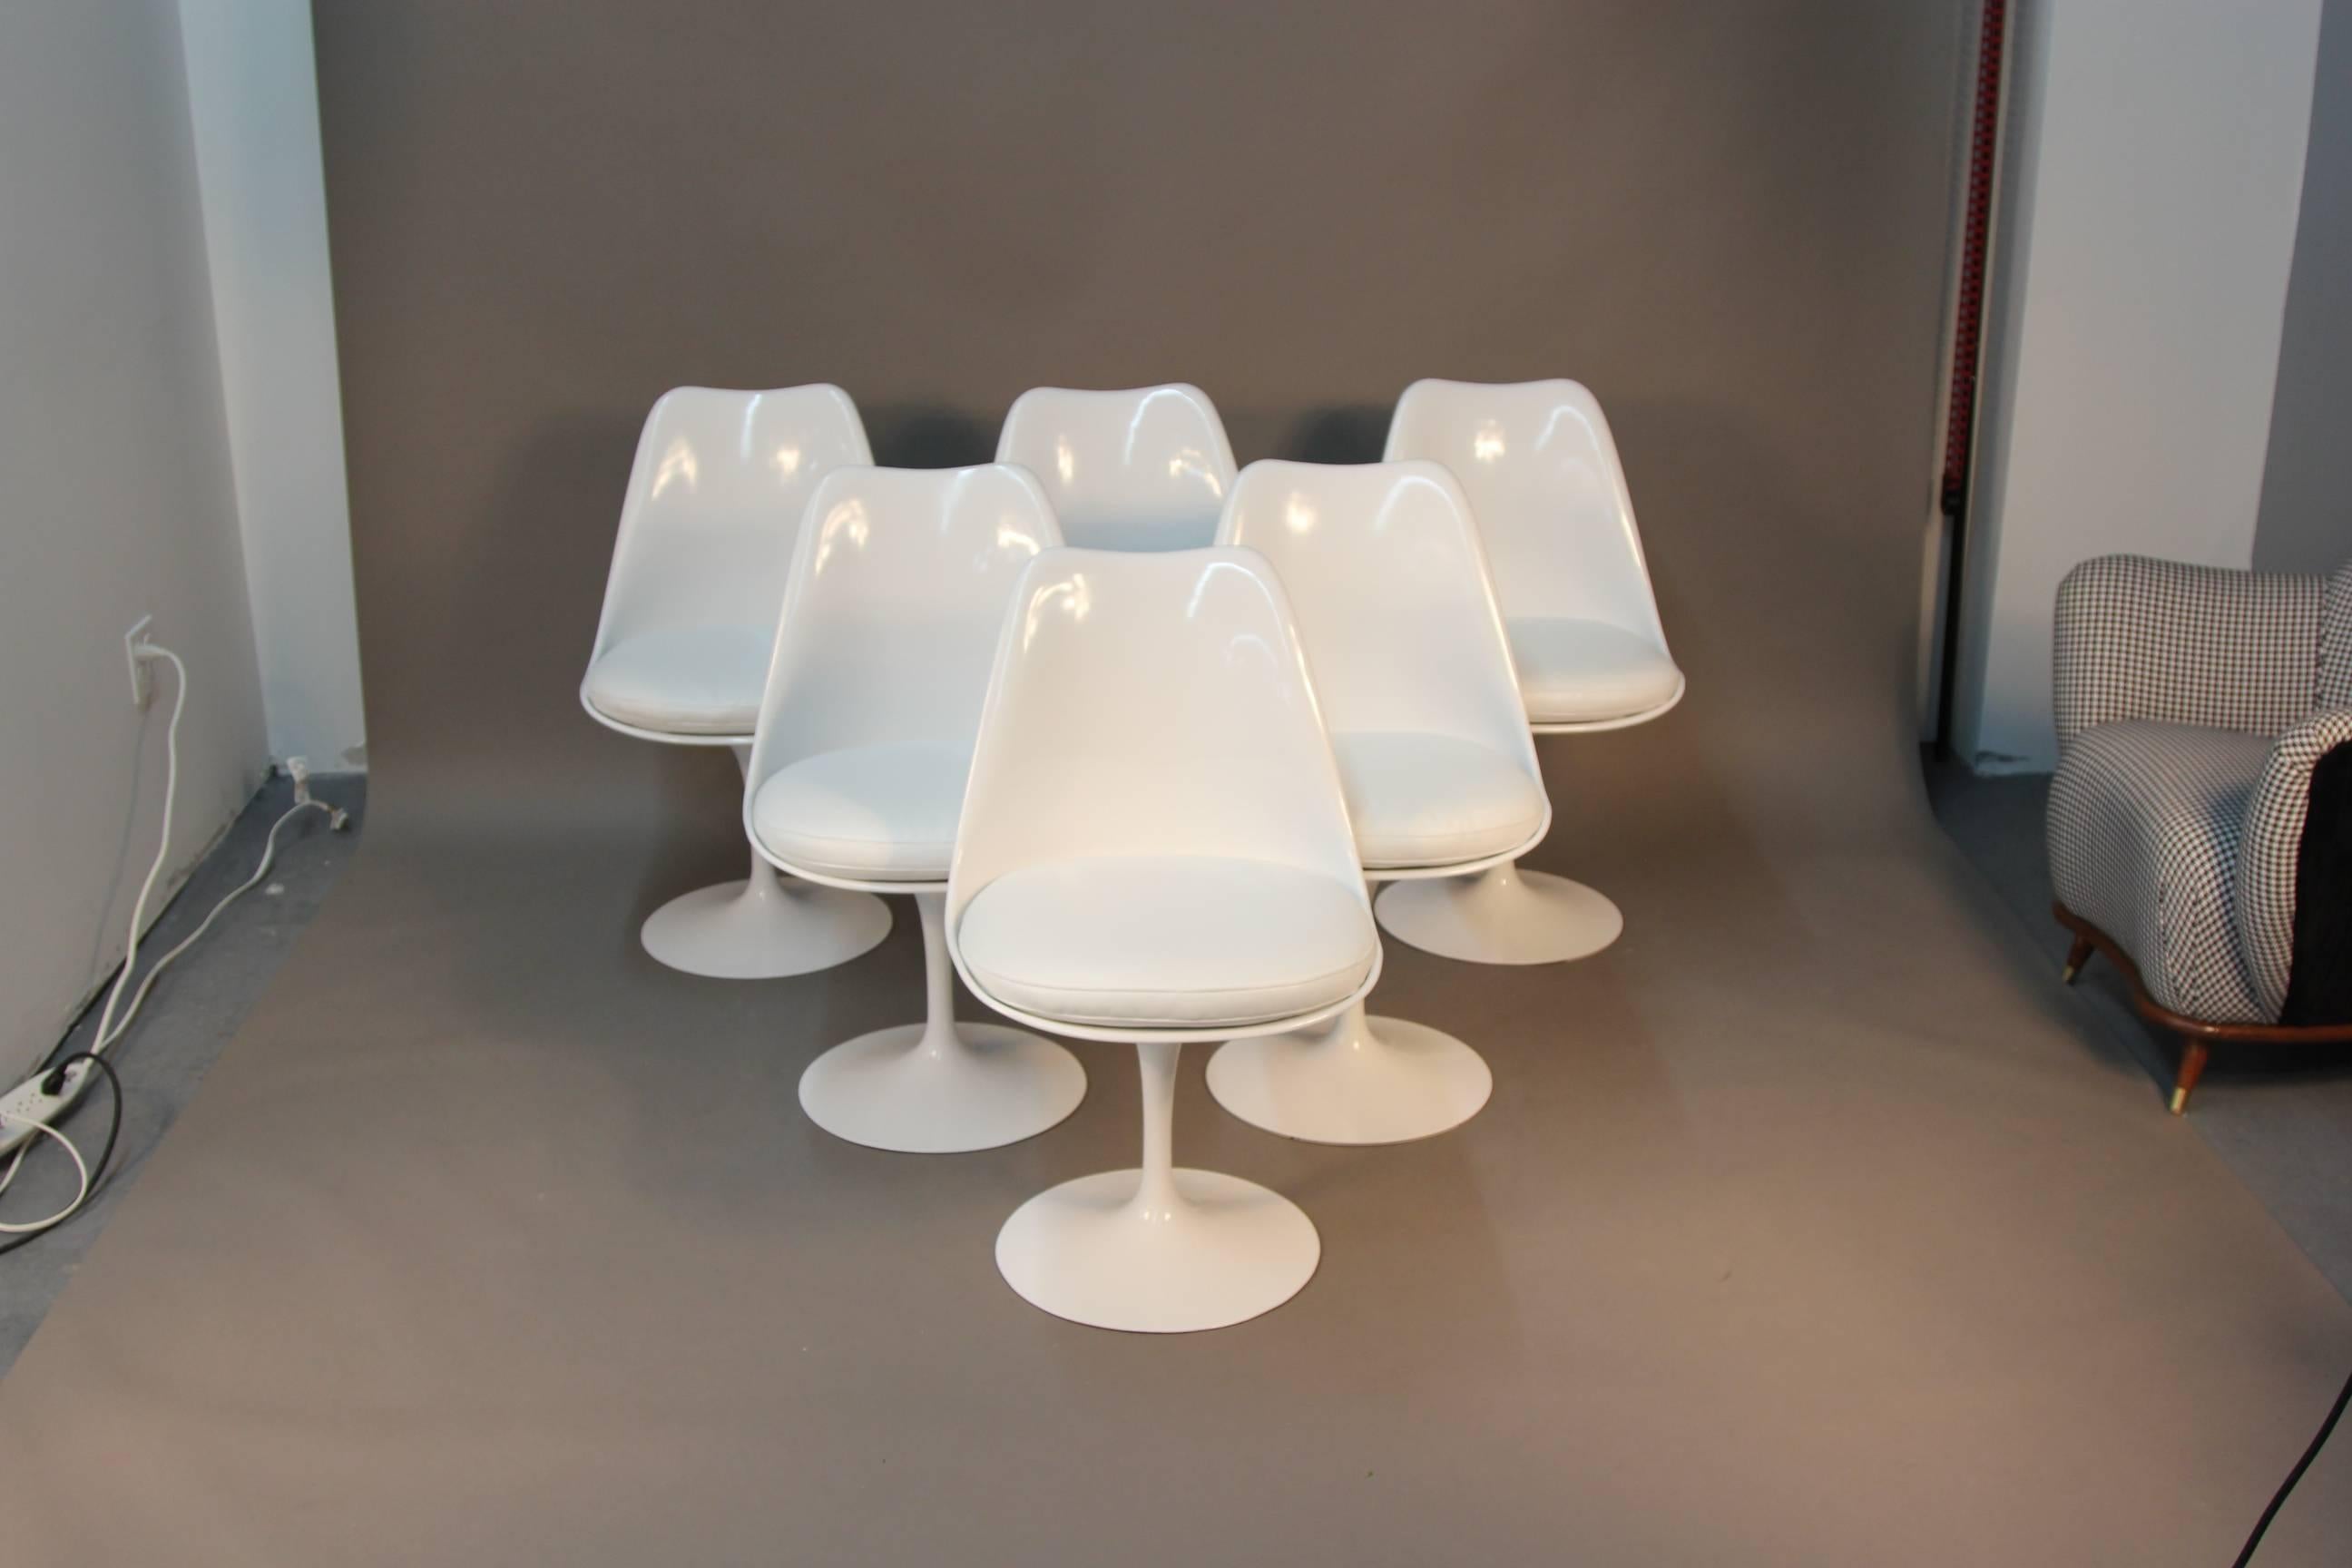 Incredible newly painted and newly upholstered set of six Saarinen tulip dining chairs. White paint, with white textured vinyl, these iconic chairs will draw attention to any dining room.